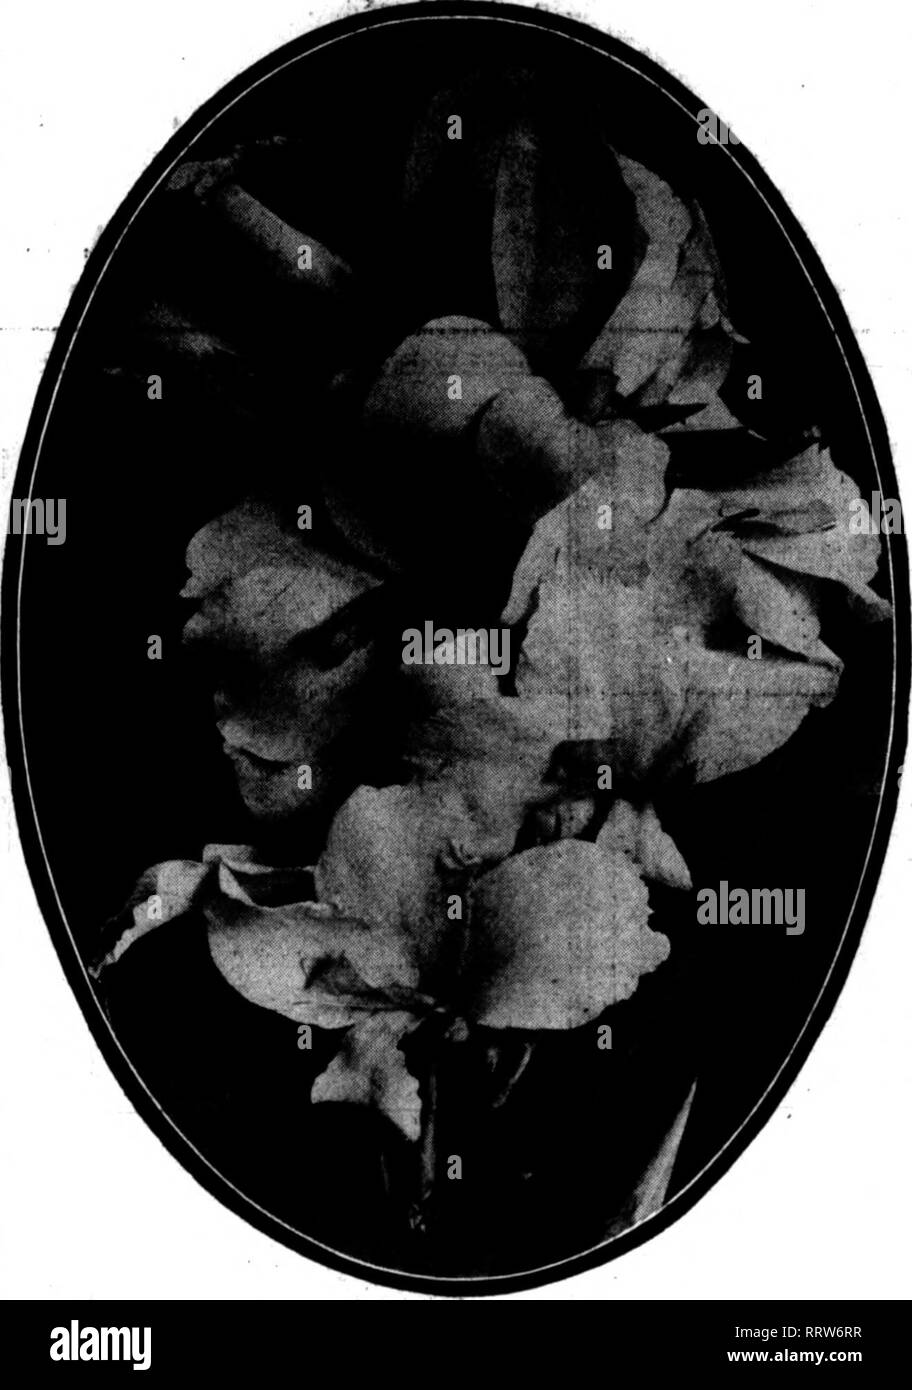 . Florists' review [microform]. Floriculture. February 12, 1914. The Florists' Review 35 MICHELL' BULBS S. CANNA ROOTS New and Standard Varieties. Doz. ALPHONSE BOUVIER, crimson $ .50 | CHAS. HENDERSON, crimson 50 CRIMSON REDDER, crimson 50 EGANDALE, bright red «0 PRES. McKINLEY, crimson 50 KING HUMBERT, orange red 85 MRS. ALFRED F. CONARD, salmon pink 2.25 GLADIOFLORA, crimson (edged gold) 1.60 MME. CROZY. scarlet 50 QUEEN CHARLOTTE, crinwon (gold border).. .60 FLORENCE VAUGHAN, yellow (spotted red).. .40 AUSTRIA, golden yellow 50 RICHARD WALLACE, light yellow ftO Also many other varieties at Stock Photo